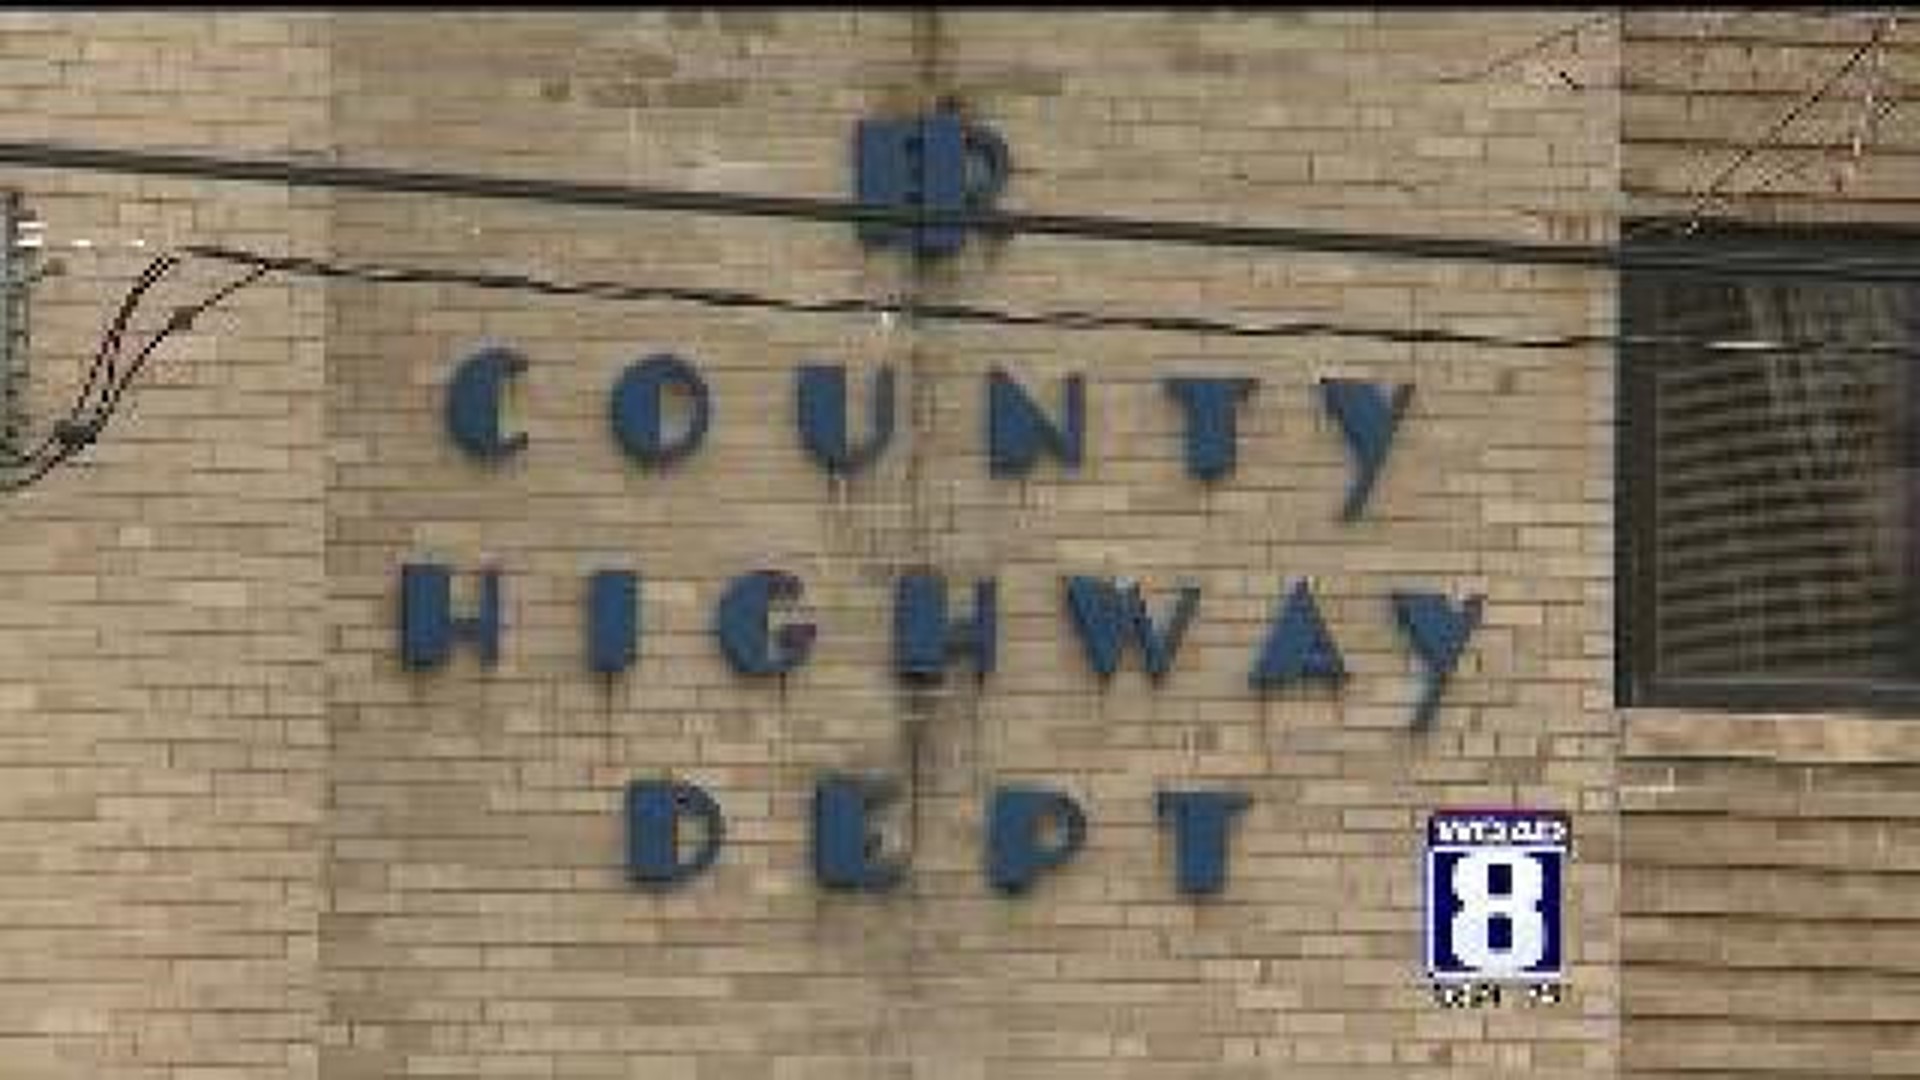 County highway foreman indicted for theft, misconduct